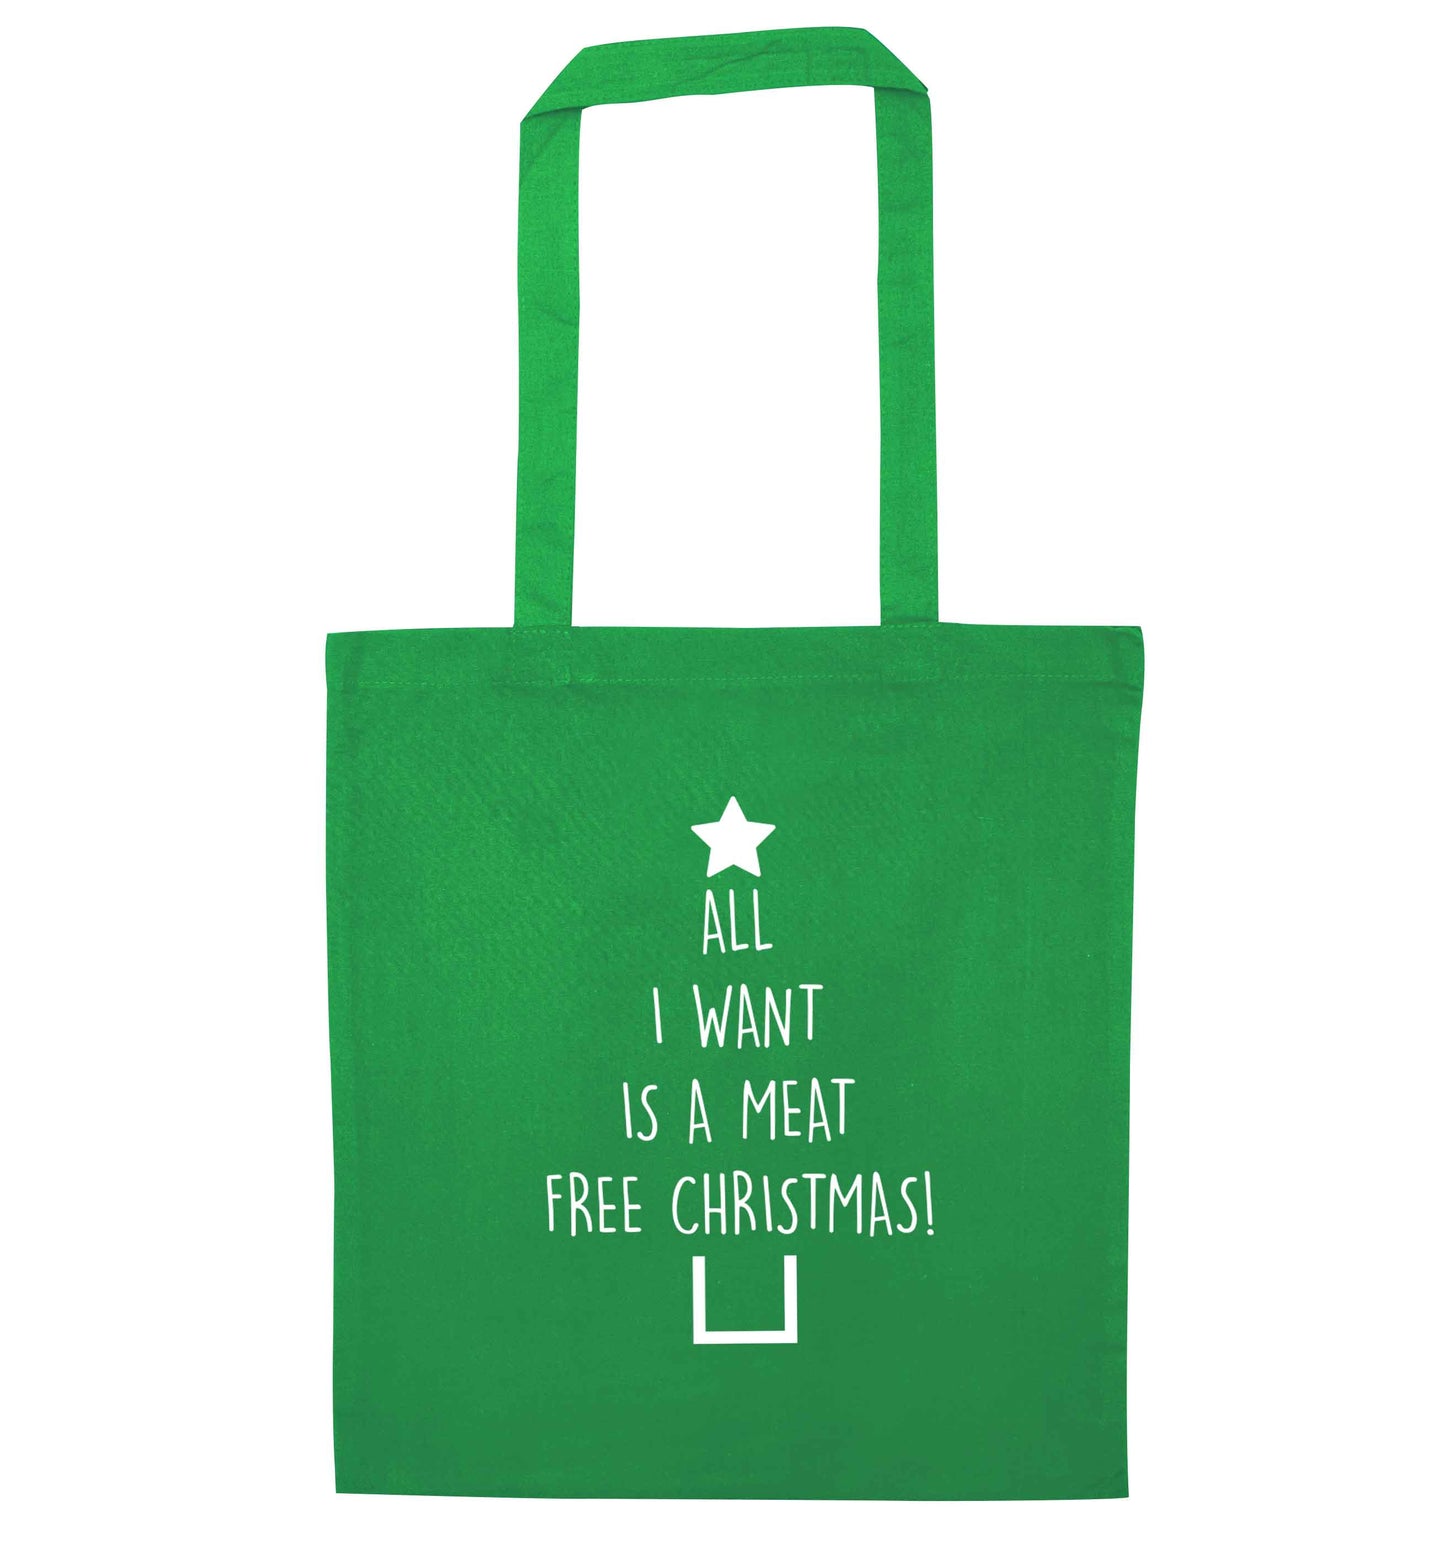 All I want is a meat free Christmas green tote bag